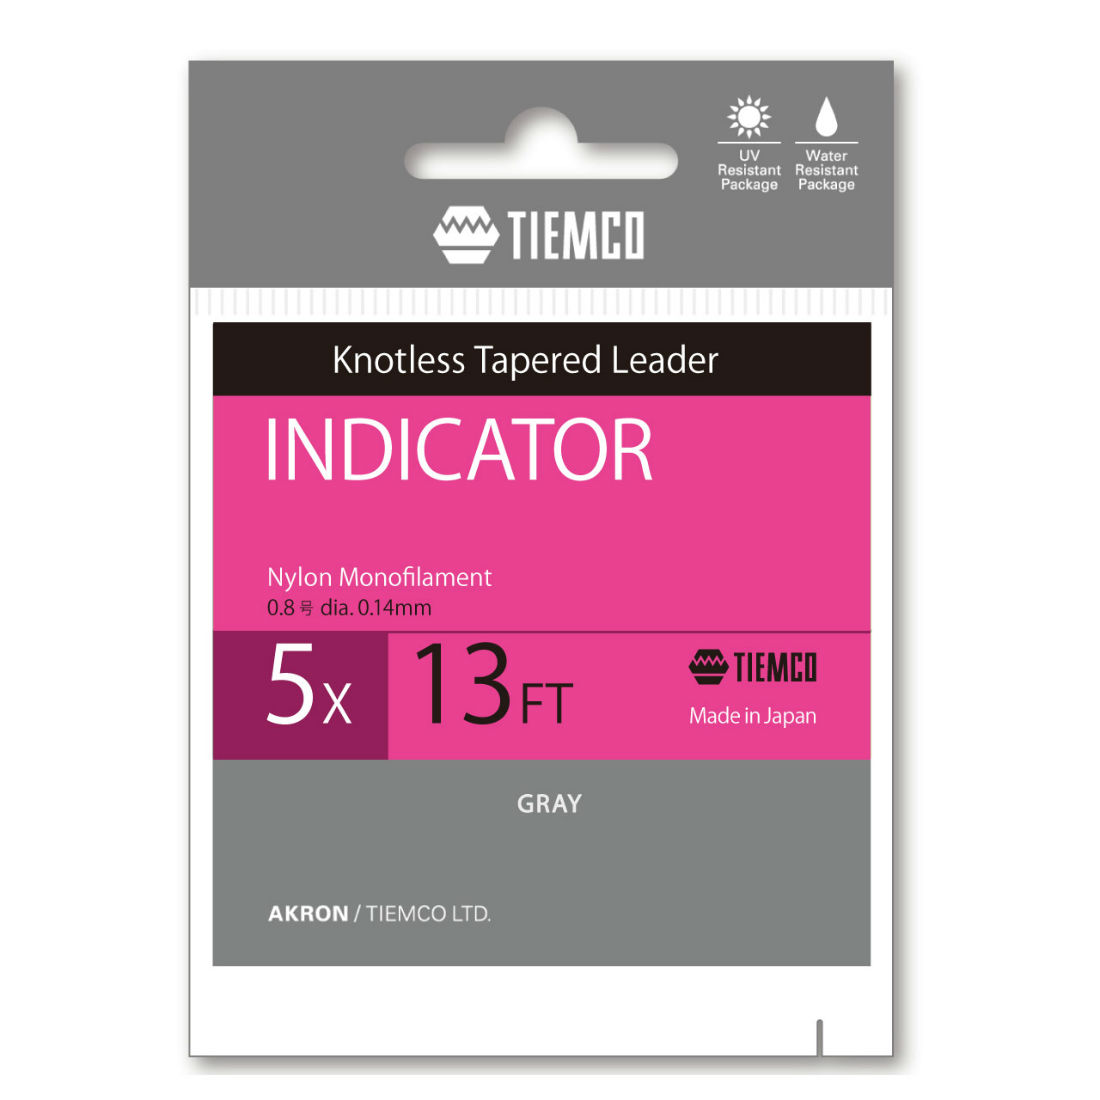 INAINTAS FLY TIEMCO INDICATOR TAPERED LEADER 13ft 5X